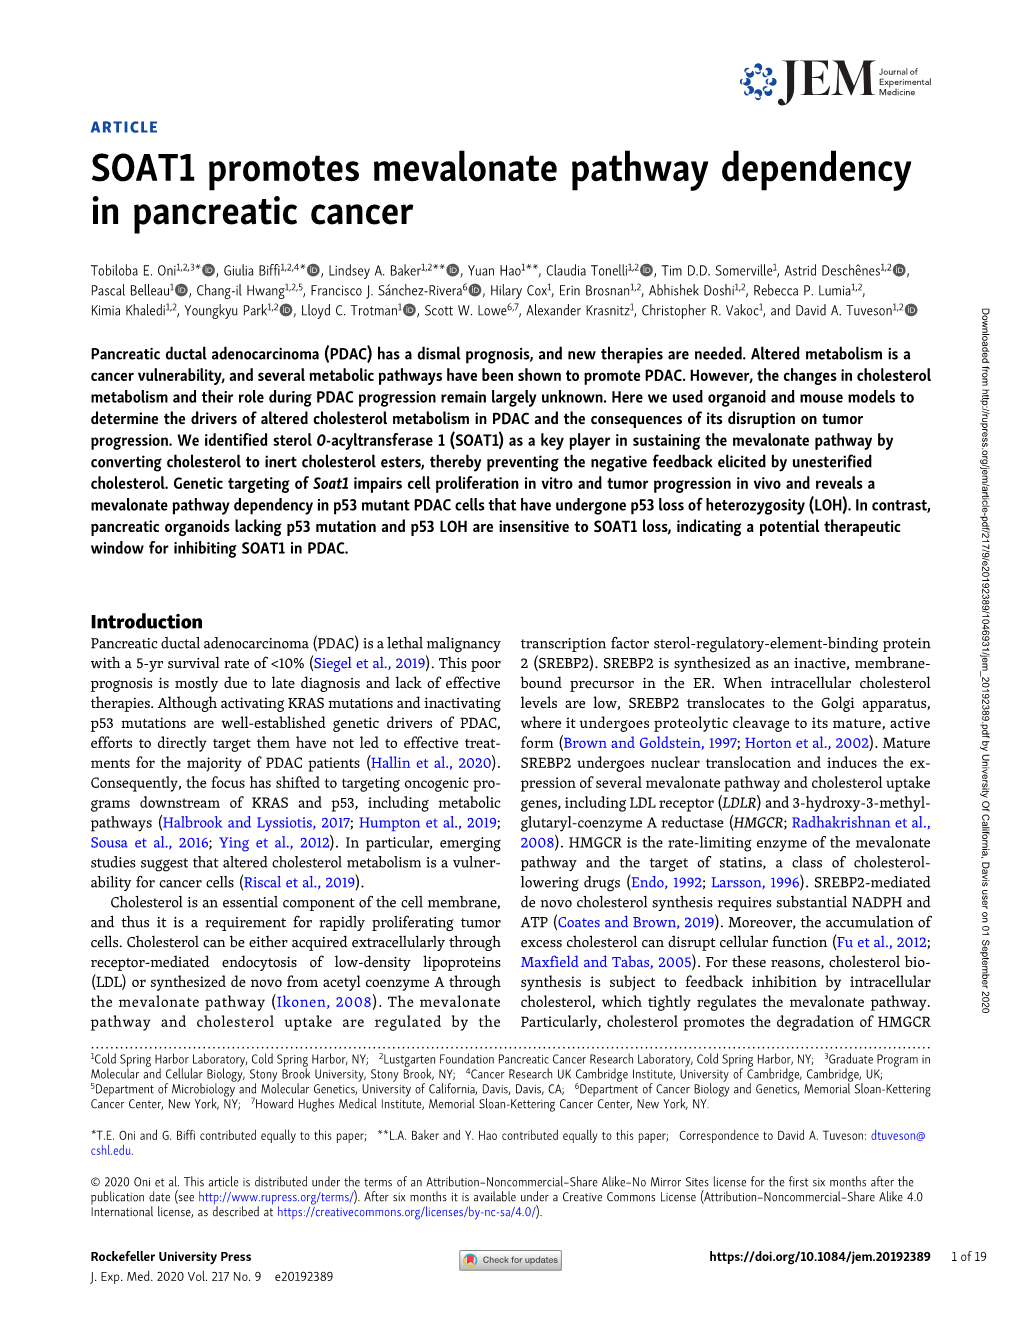 SOAT1 Promotes Mevalonate Pathway Dependency in Pancreatic Cancer